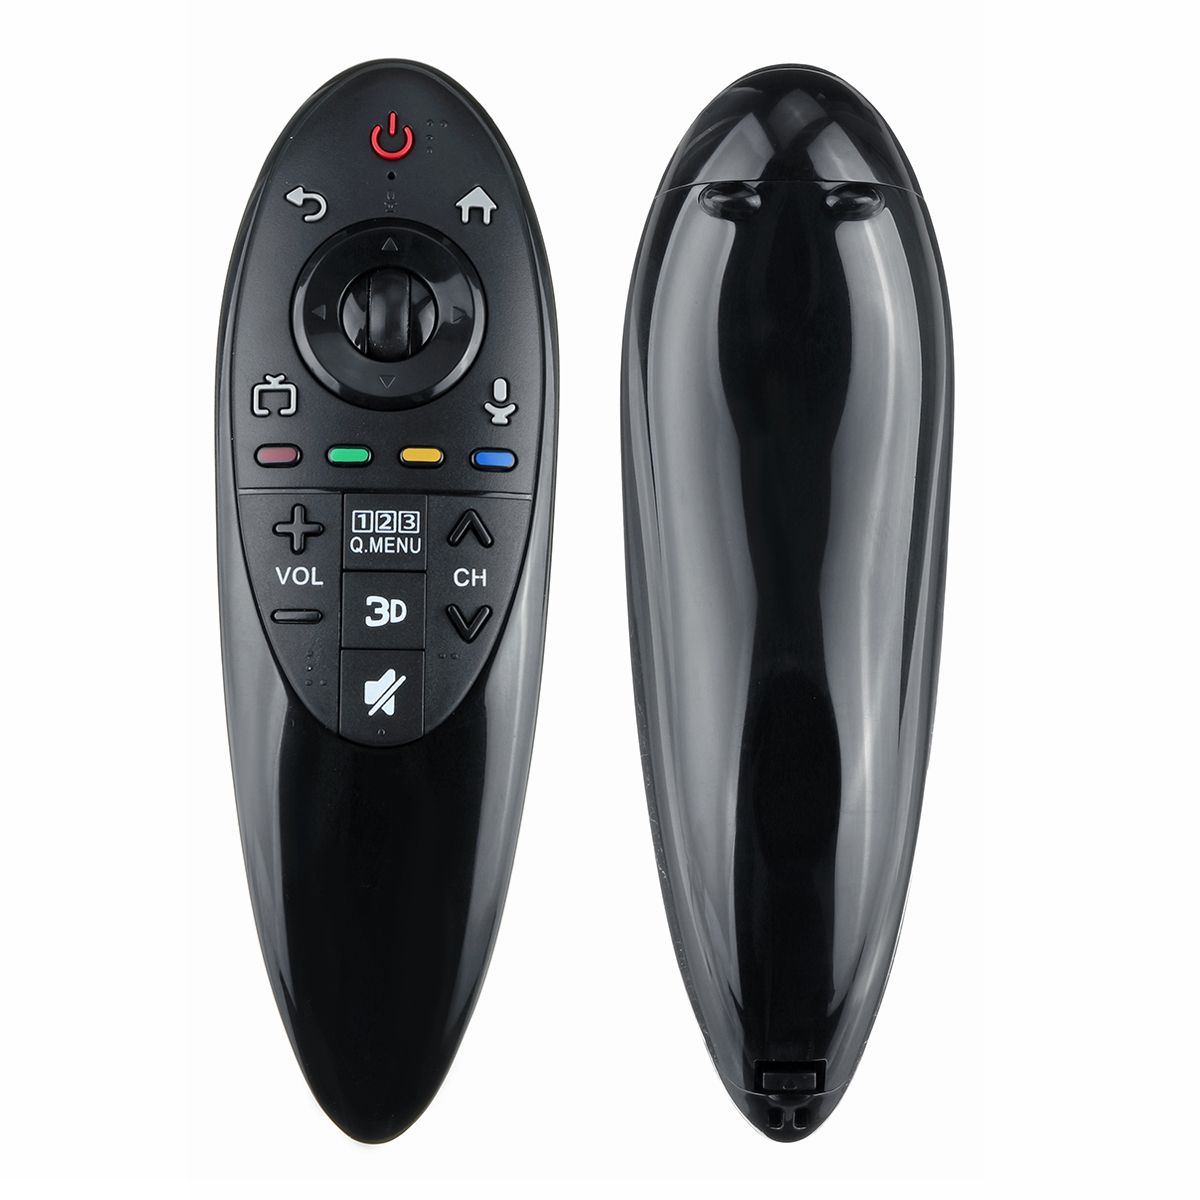 Replacement-Remote-Control-Controller-for-LG-3D-Smart-HD-TV-AN-MR500G-AN-MR500-MBM63935937-1627104